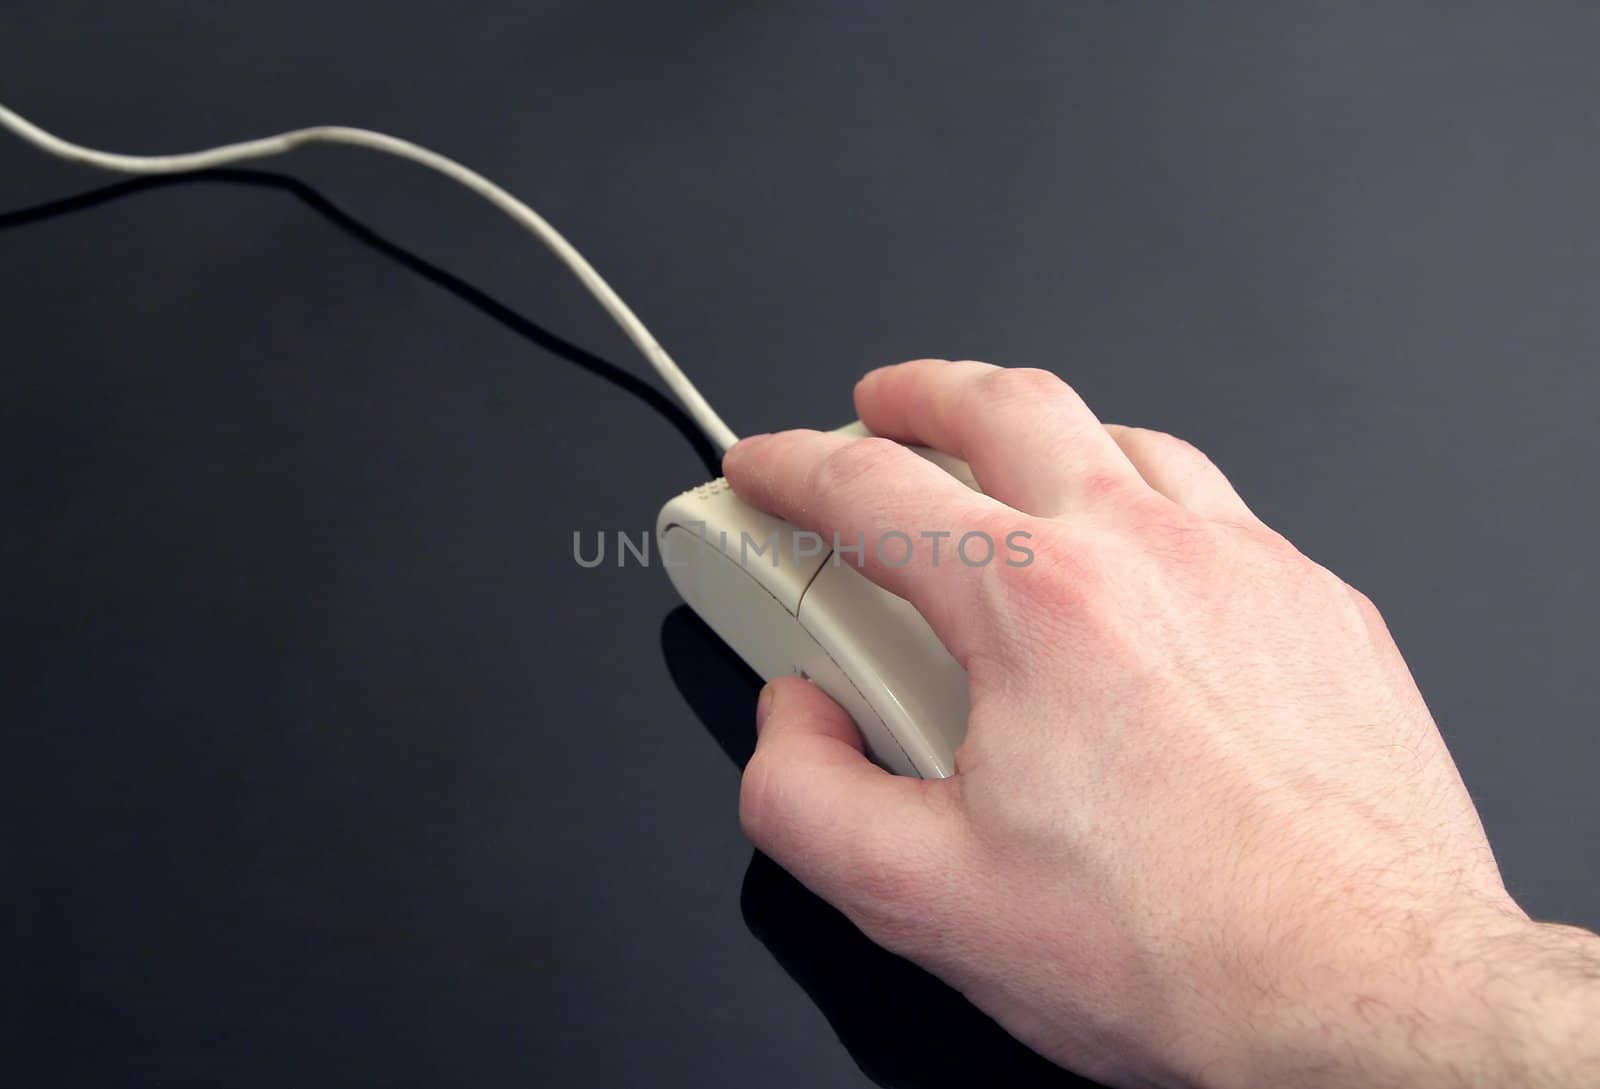 man's hand holding computer mouse, black reflective background